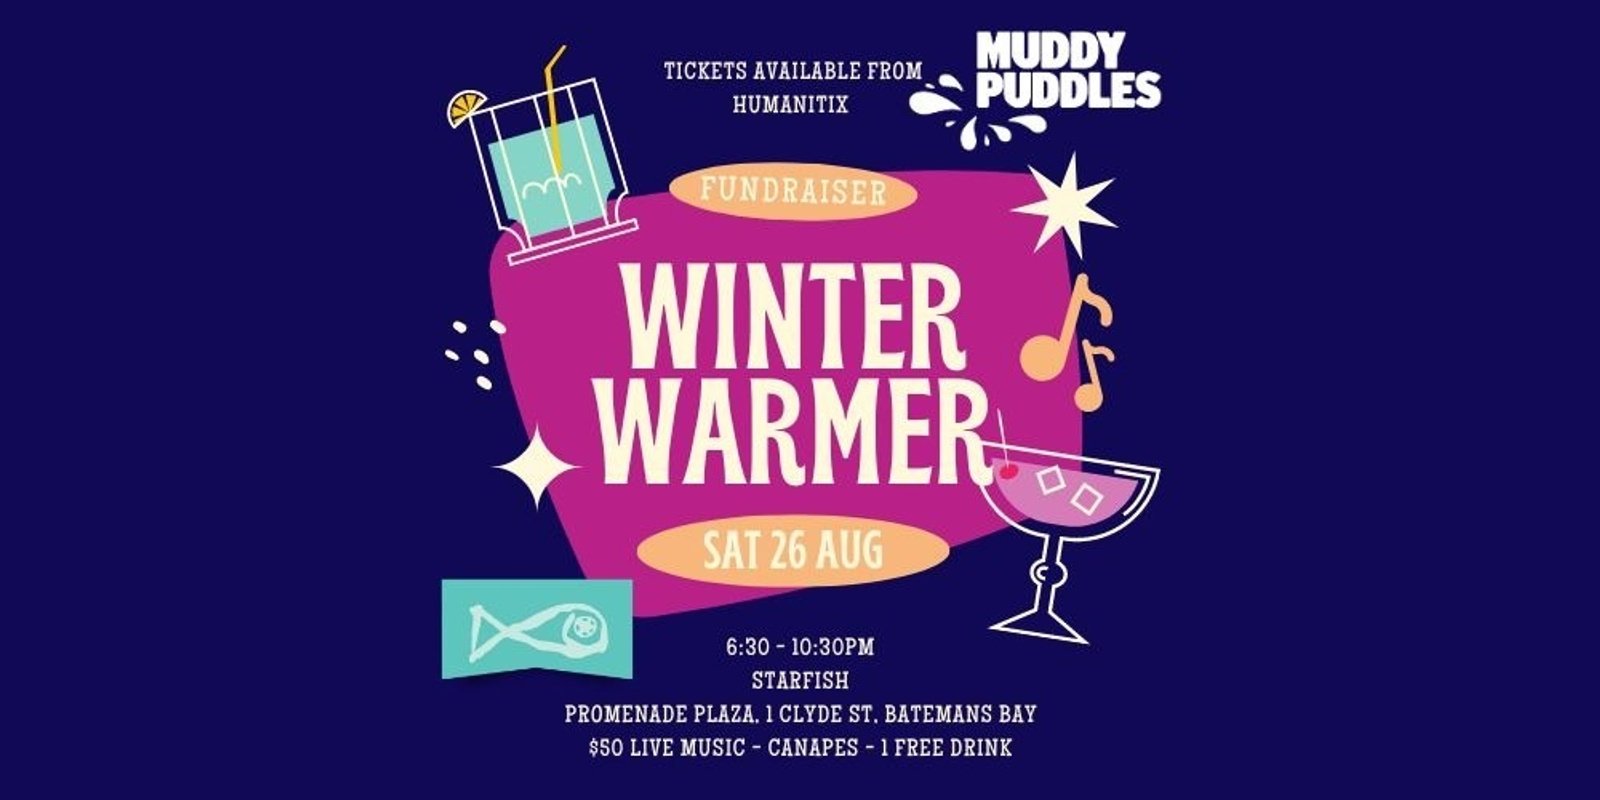 Banner image for Winter Warmer - fundraiser for Muddy Puddles